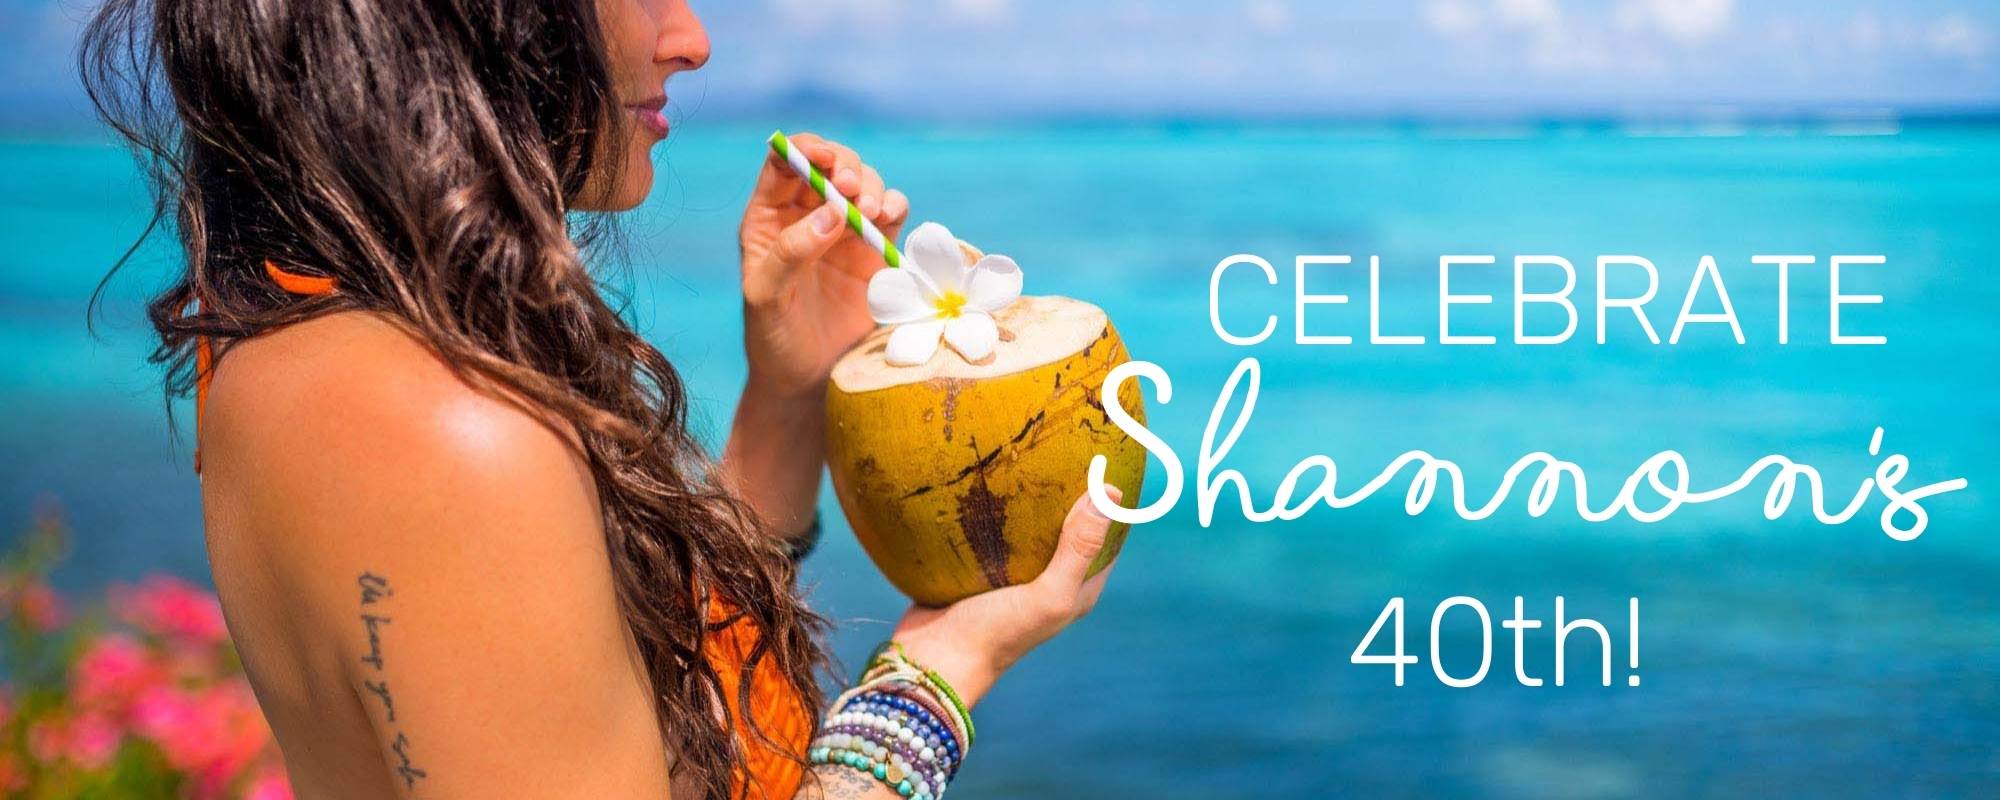 [ENDED] CELEBRATE SHANNON'S 40th WITH 40% OFF!